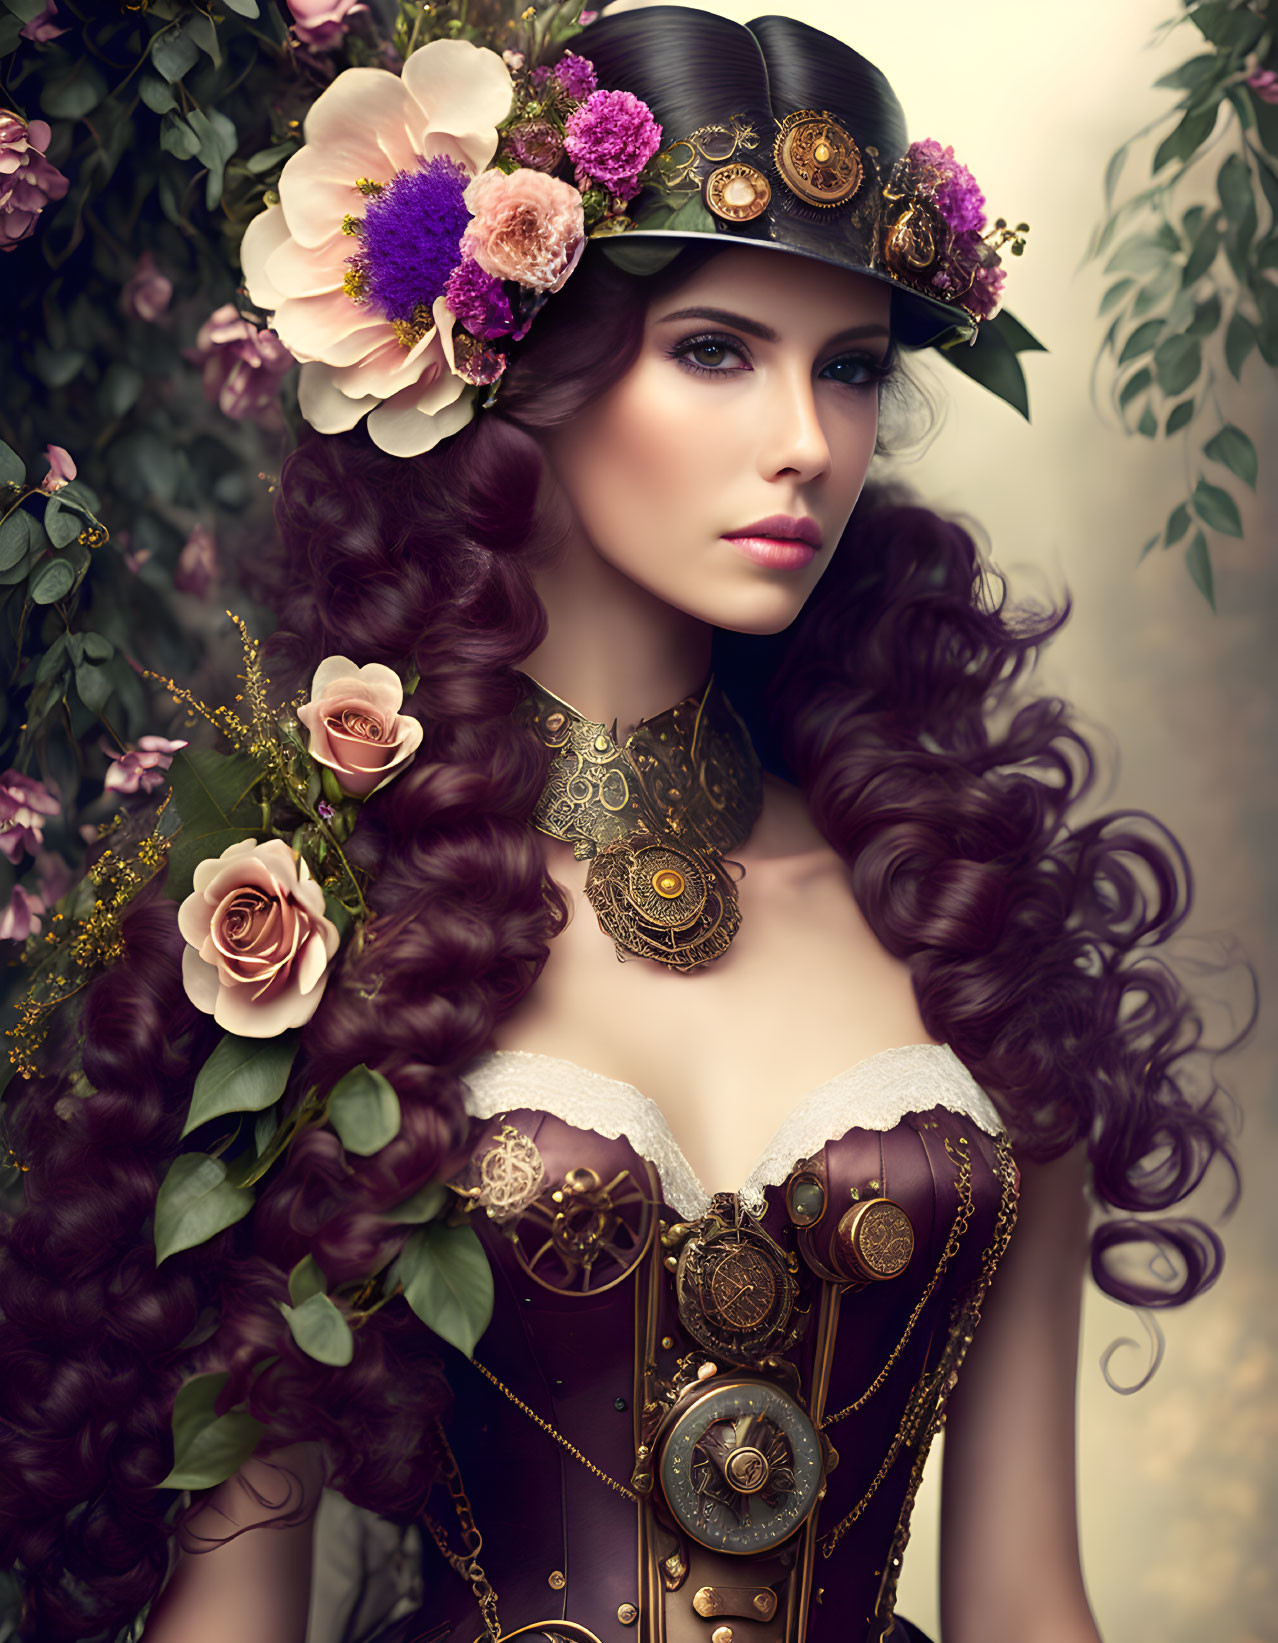 Pretty Steampunk Lady and Roses